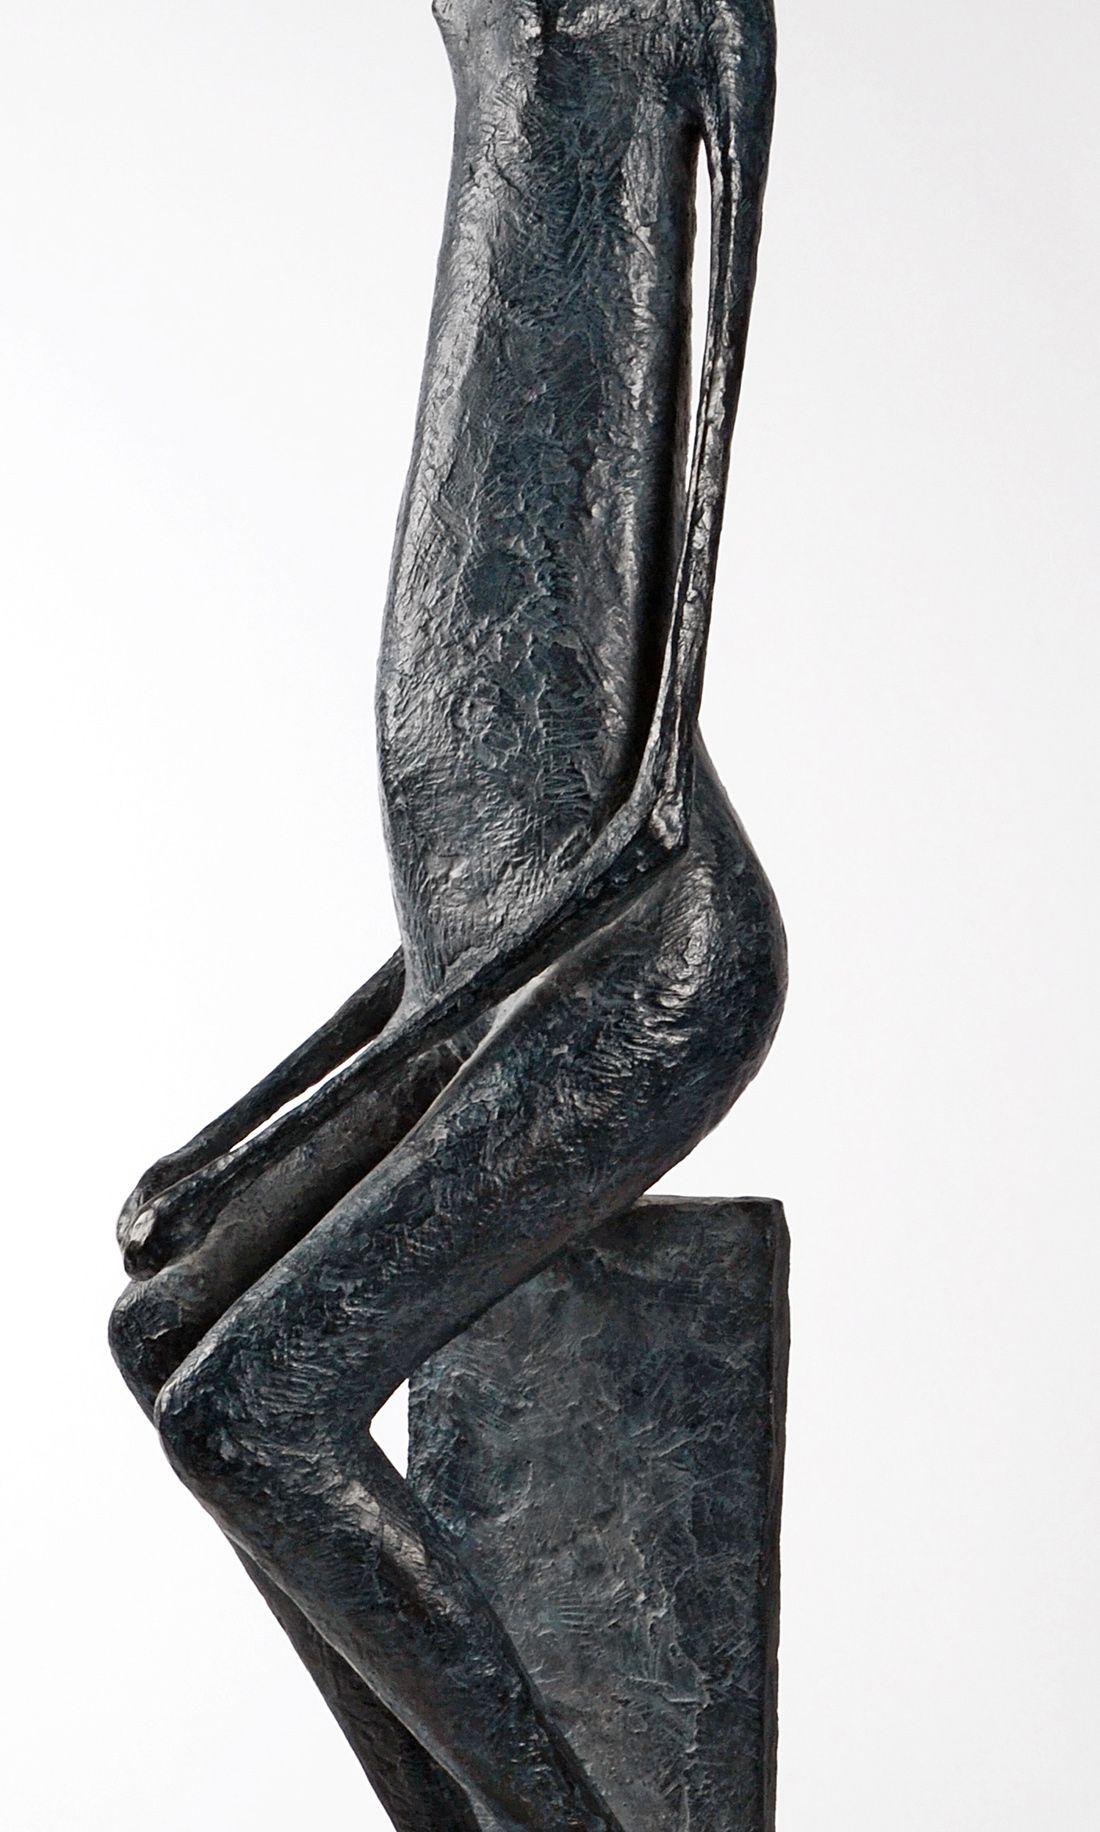 Large Seared Figure I (Grande figure assise I)  is a large-scale sculpture by French contemporary artist Pierre Yermia. Bronze, 111 cm × 24 cm × 22 cm. Edition of 8 + 4 A.P. Each cast is signed and numbered. 
Pierre Yermia has been developing for